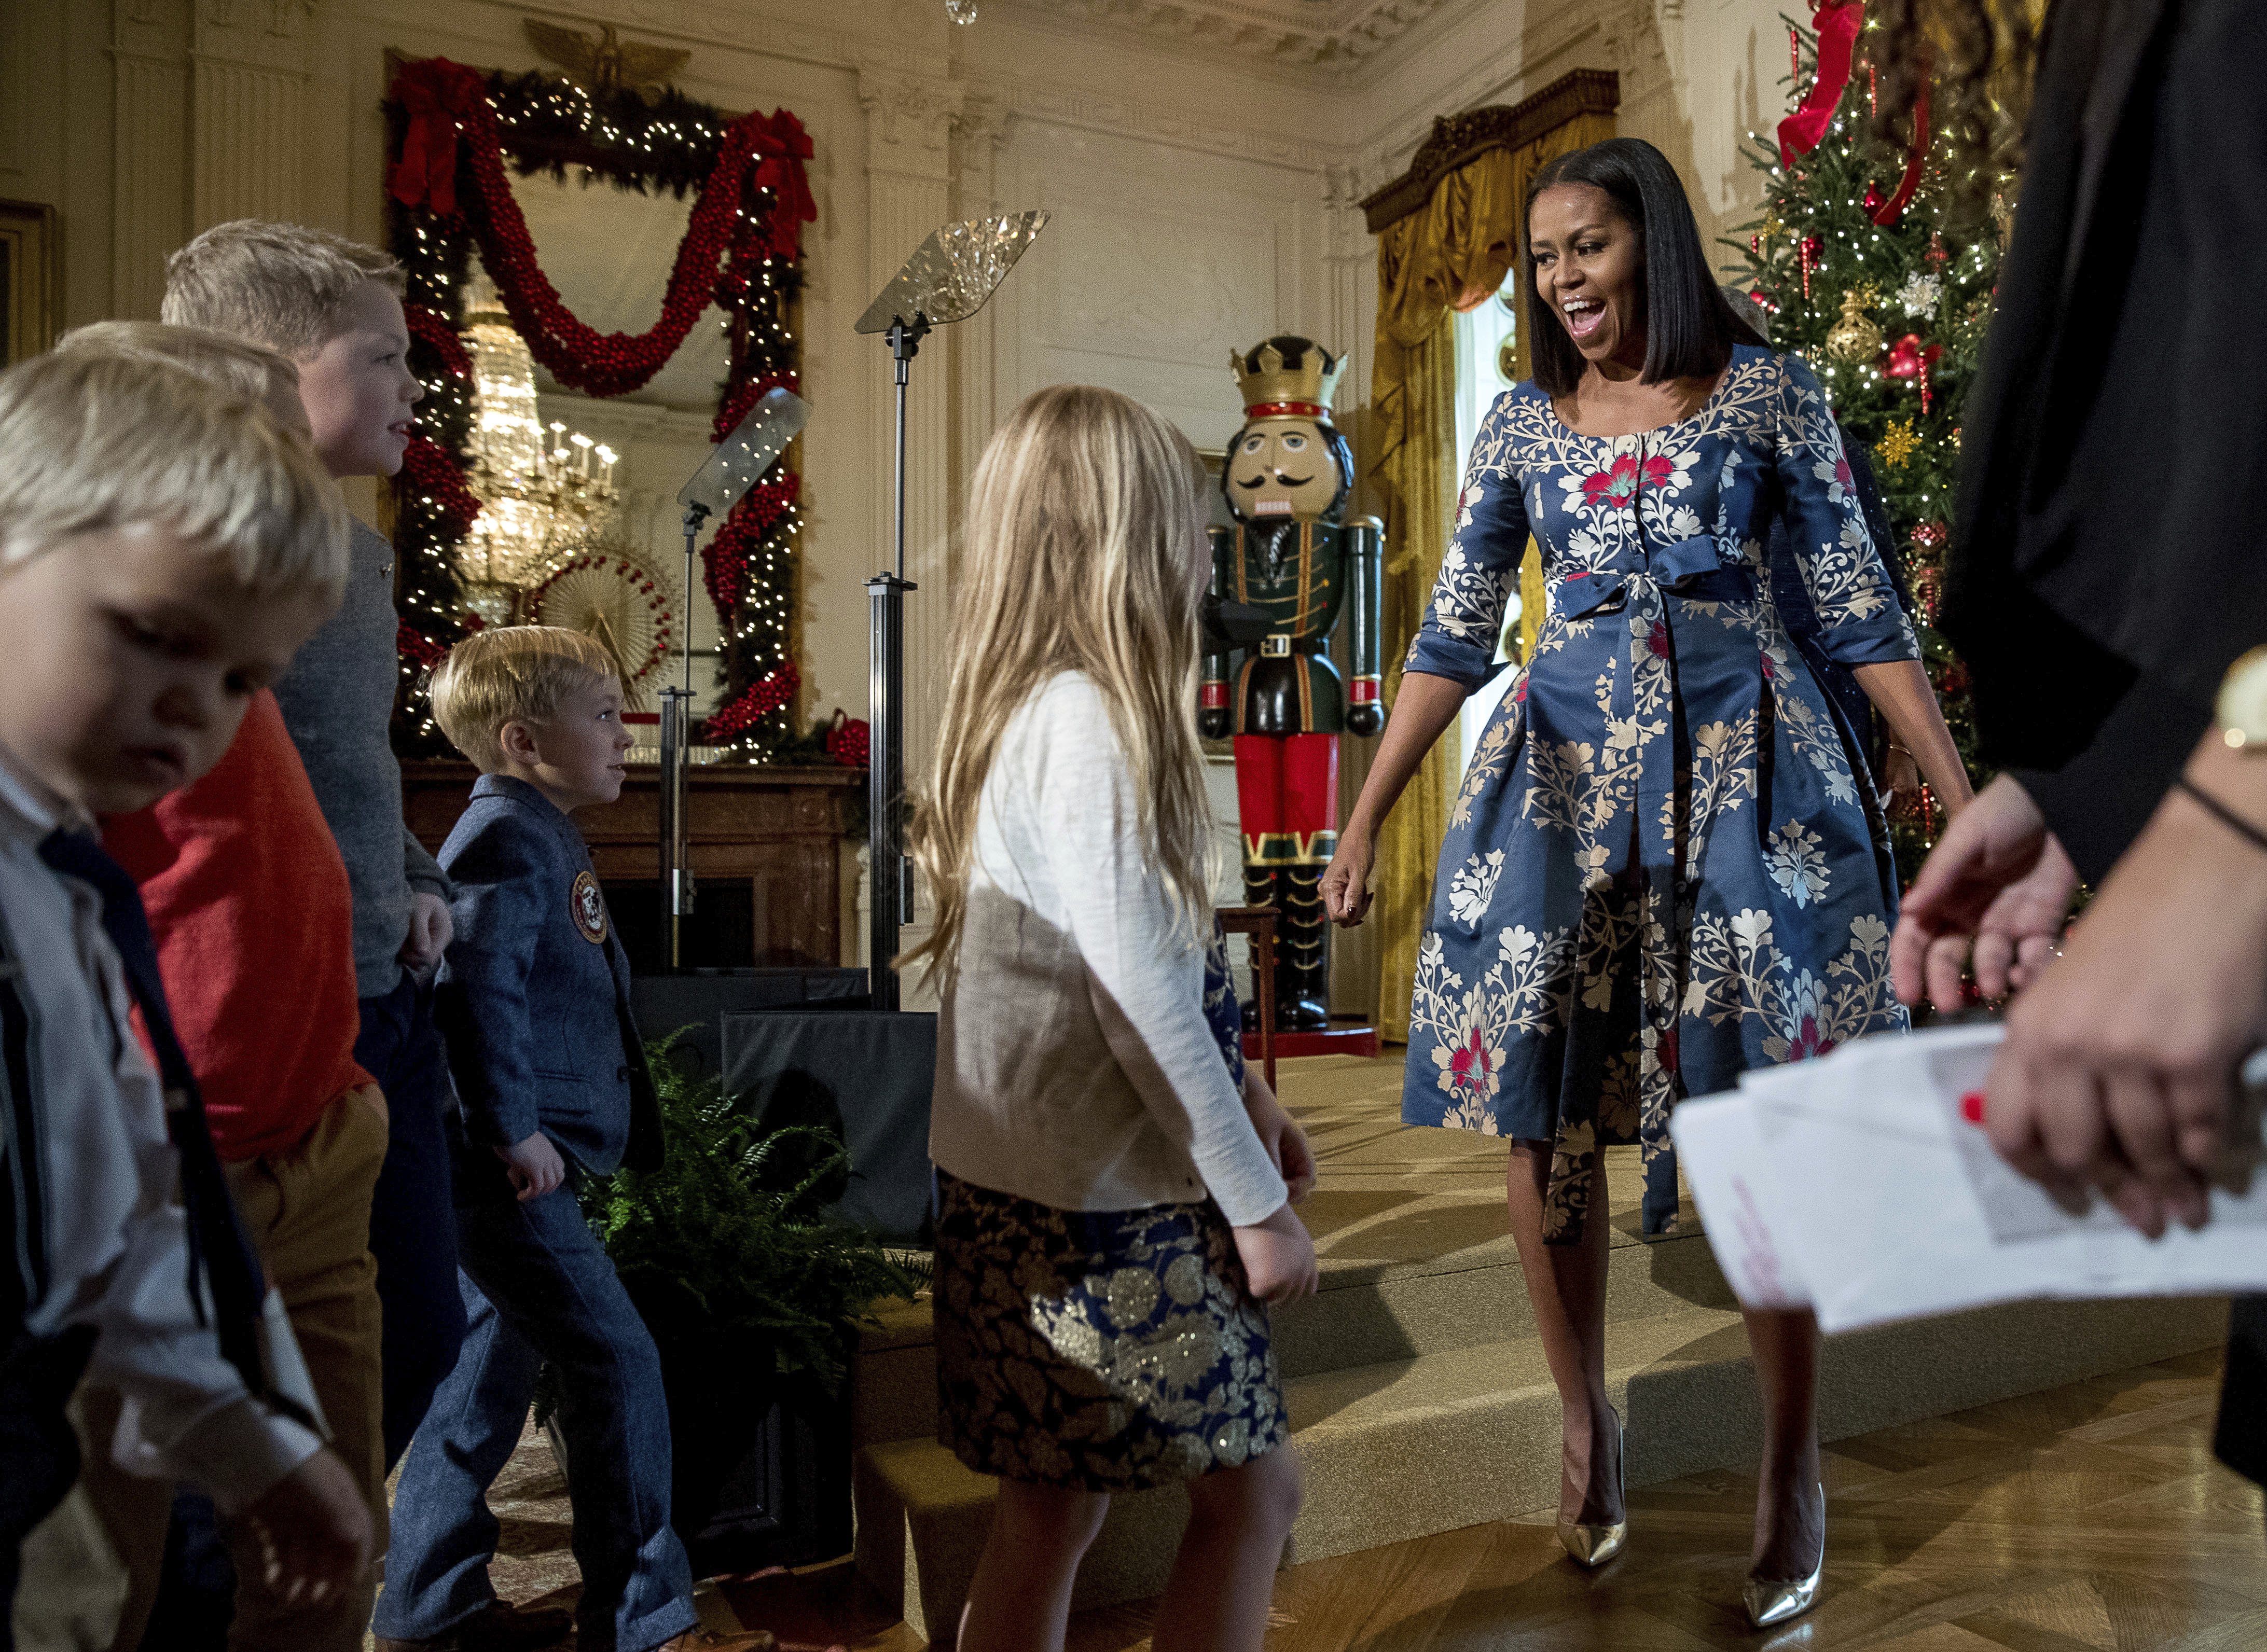 Porn Michelle Obama Daughter Sasha - Michelle Obama redefines role of the first lady | The Birmingham Times